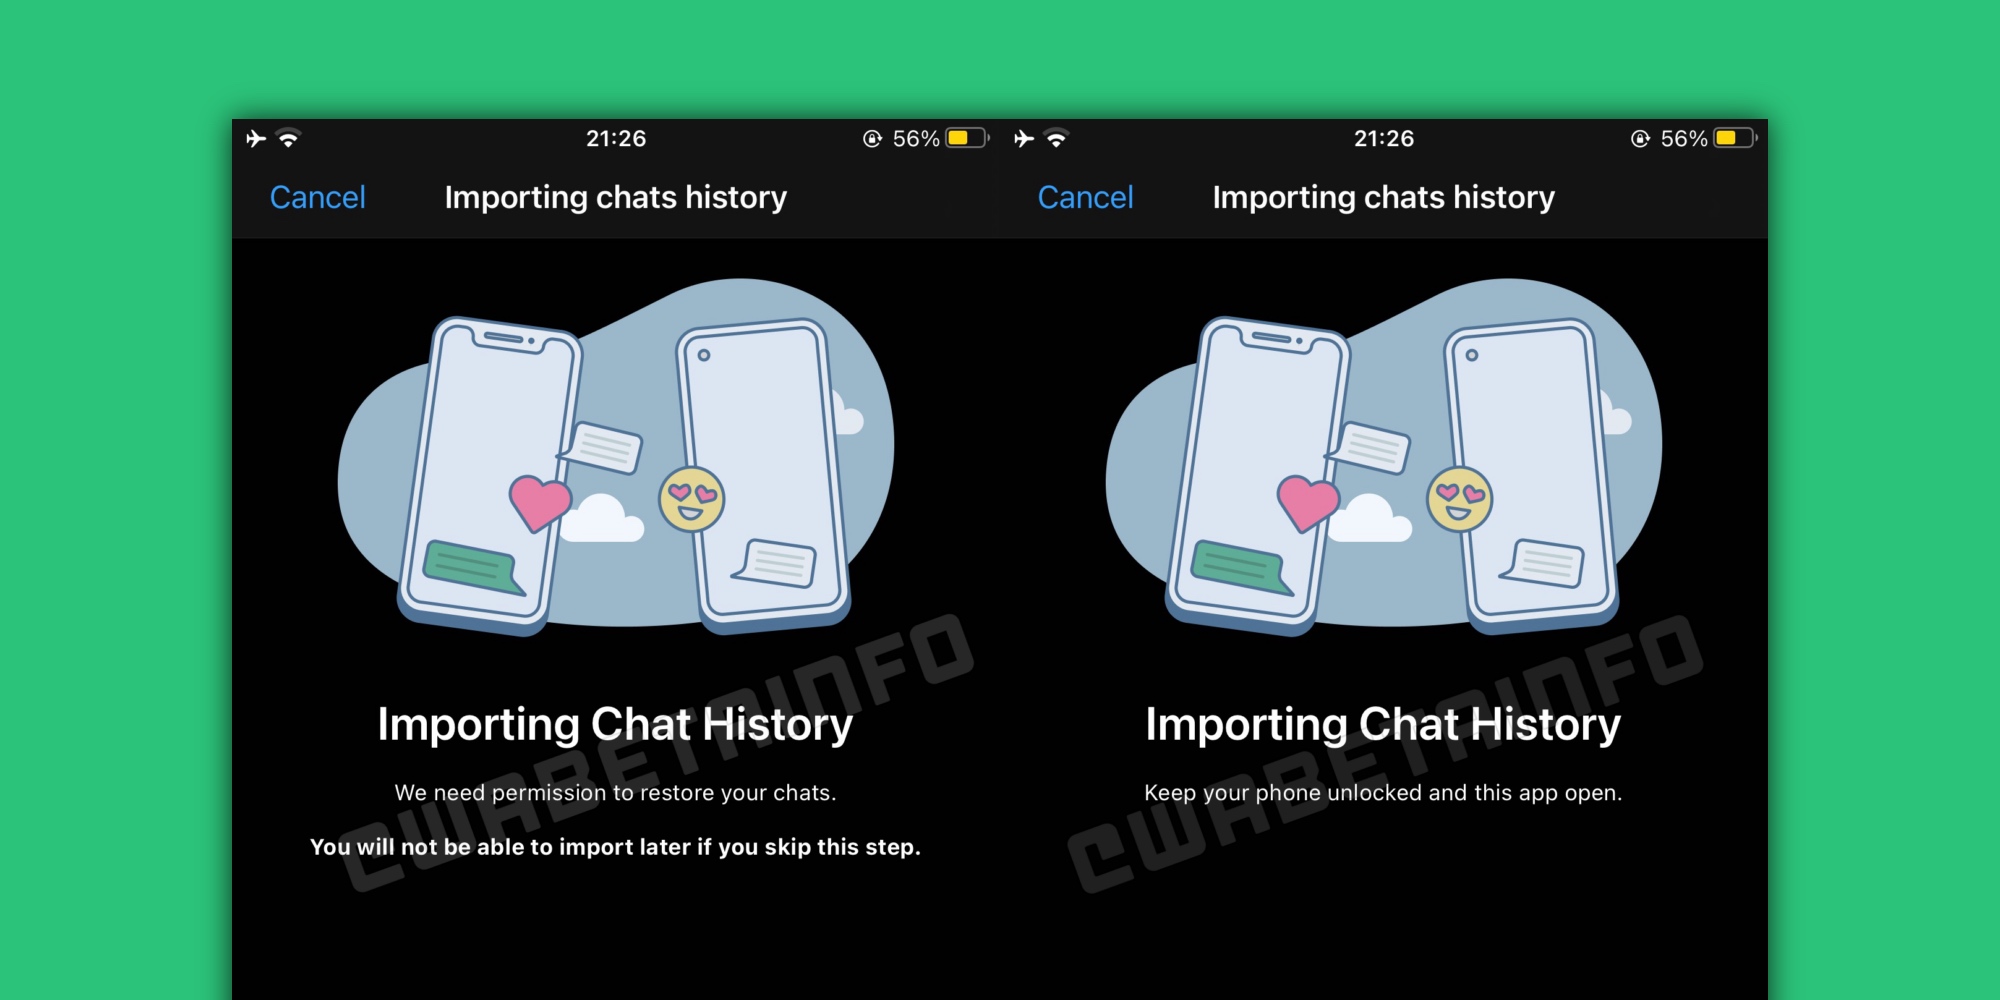 How to import old chats in whatsapp